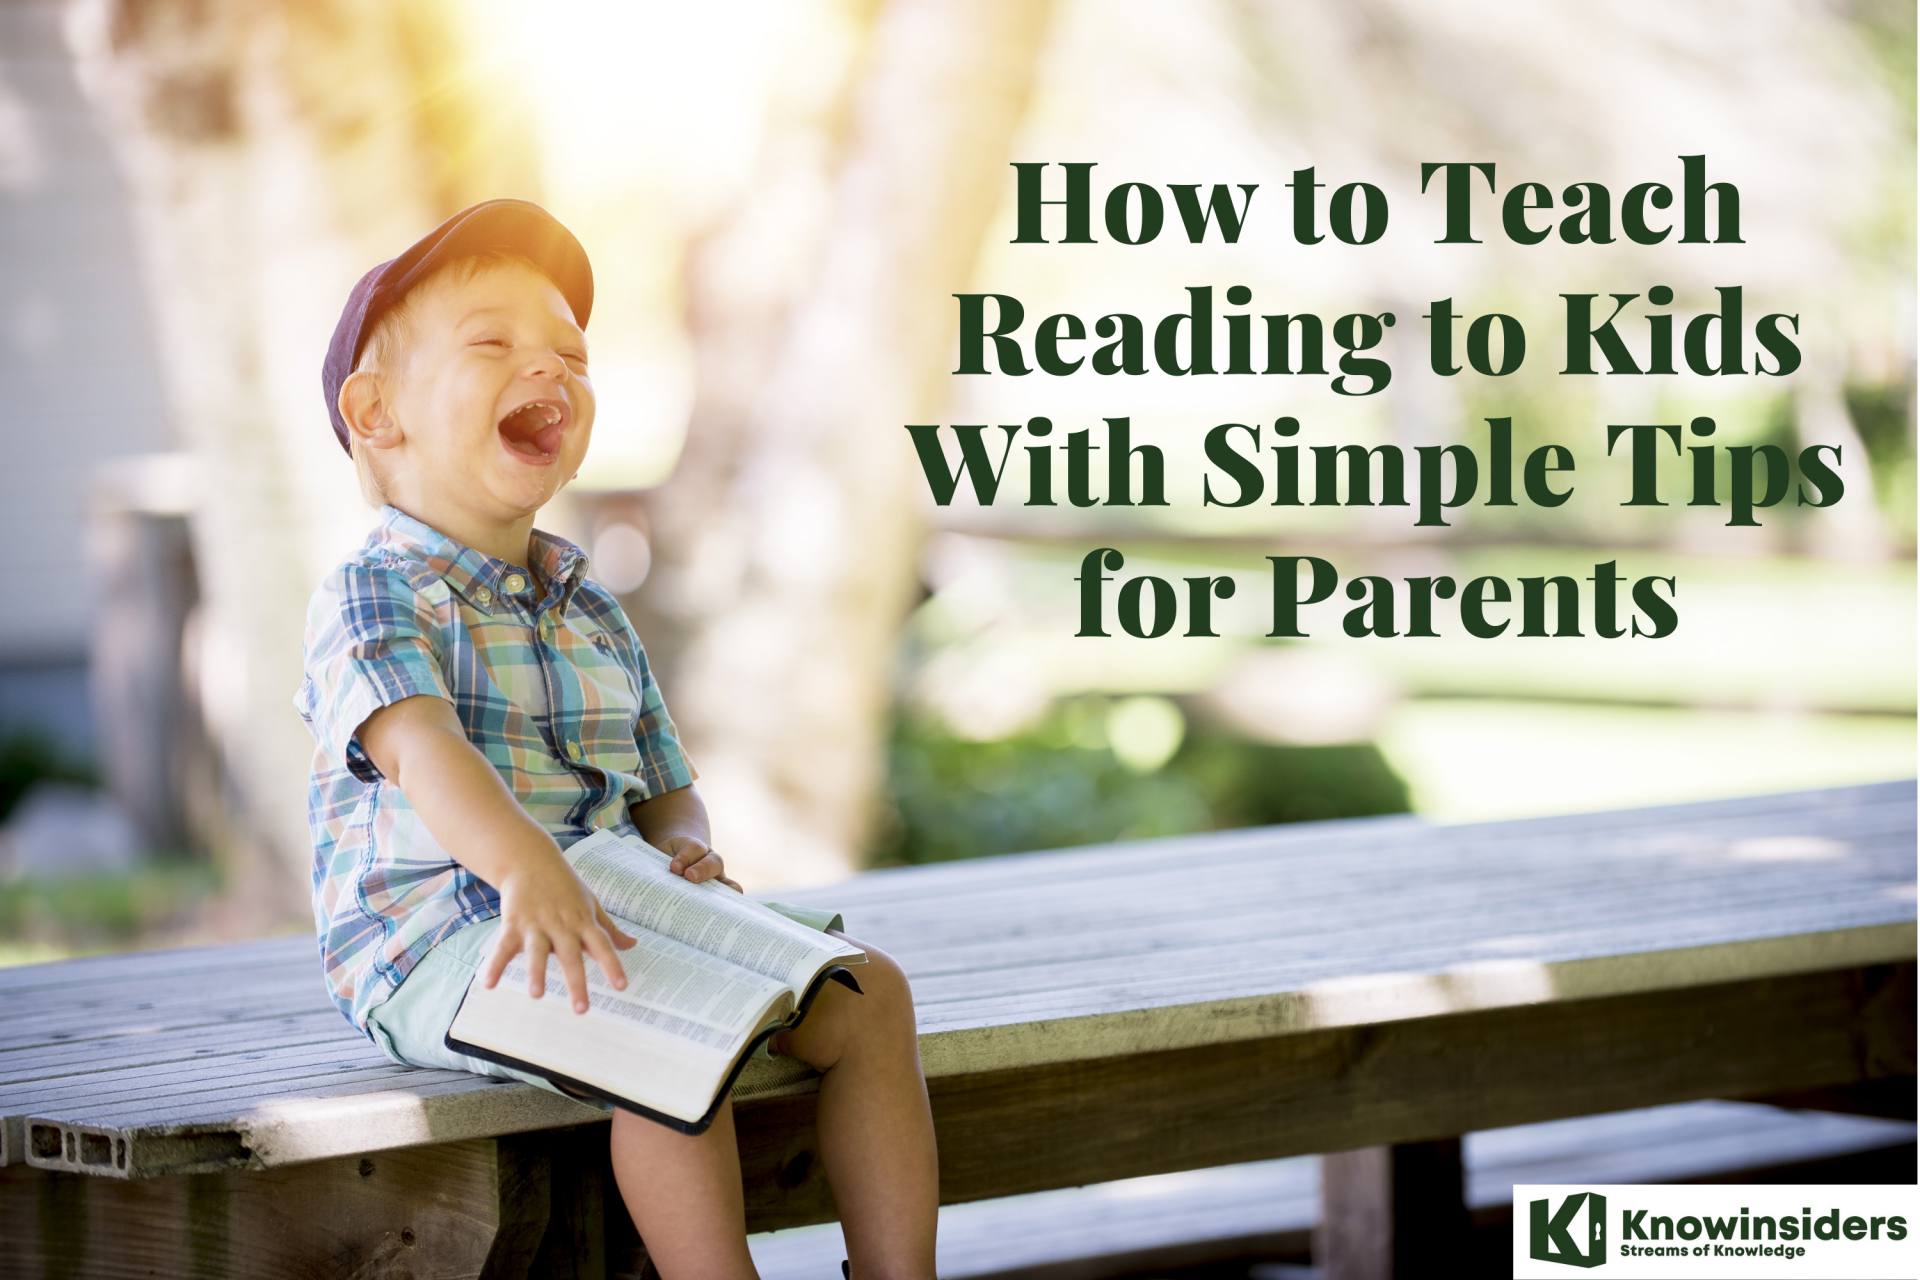 How to Teach Reading to Kids With Simple Tips for Parents